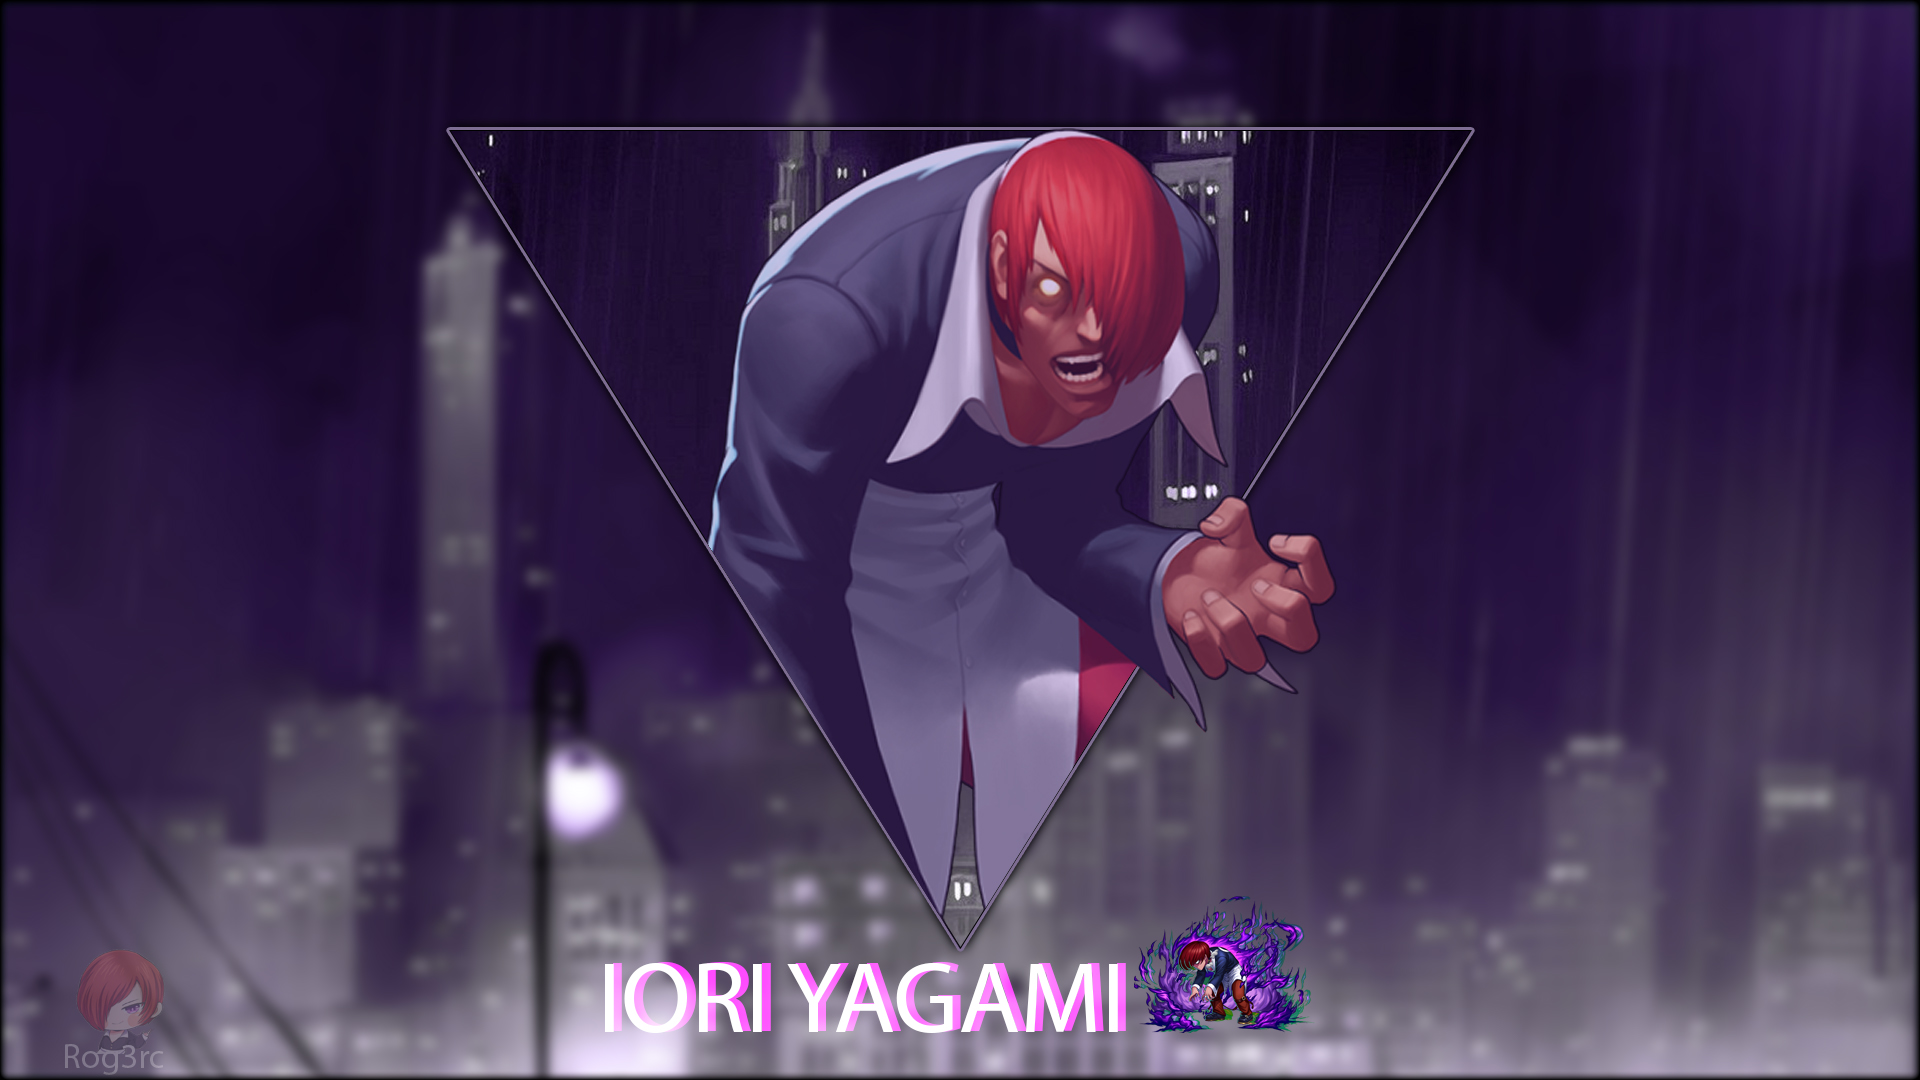 Iori Yagami  The King of Fighters wallpaper  Game wallpapers  30390